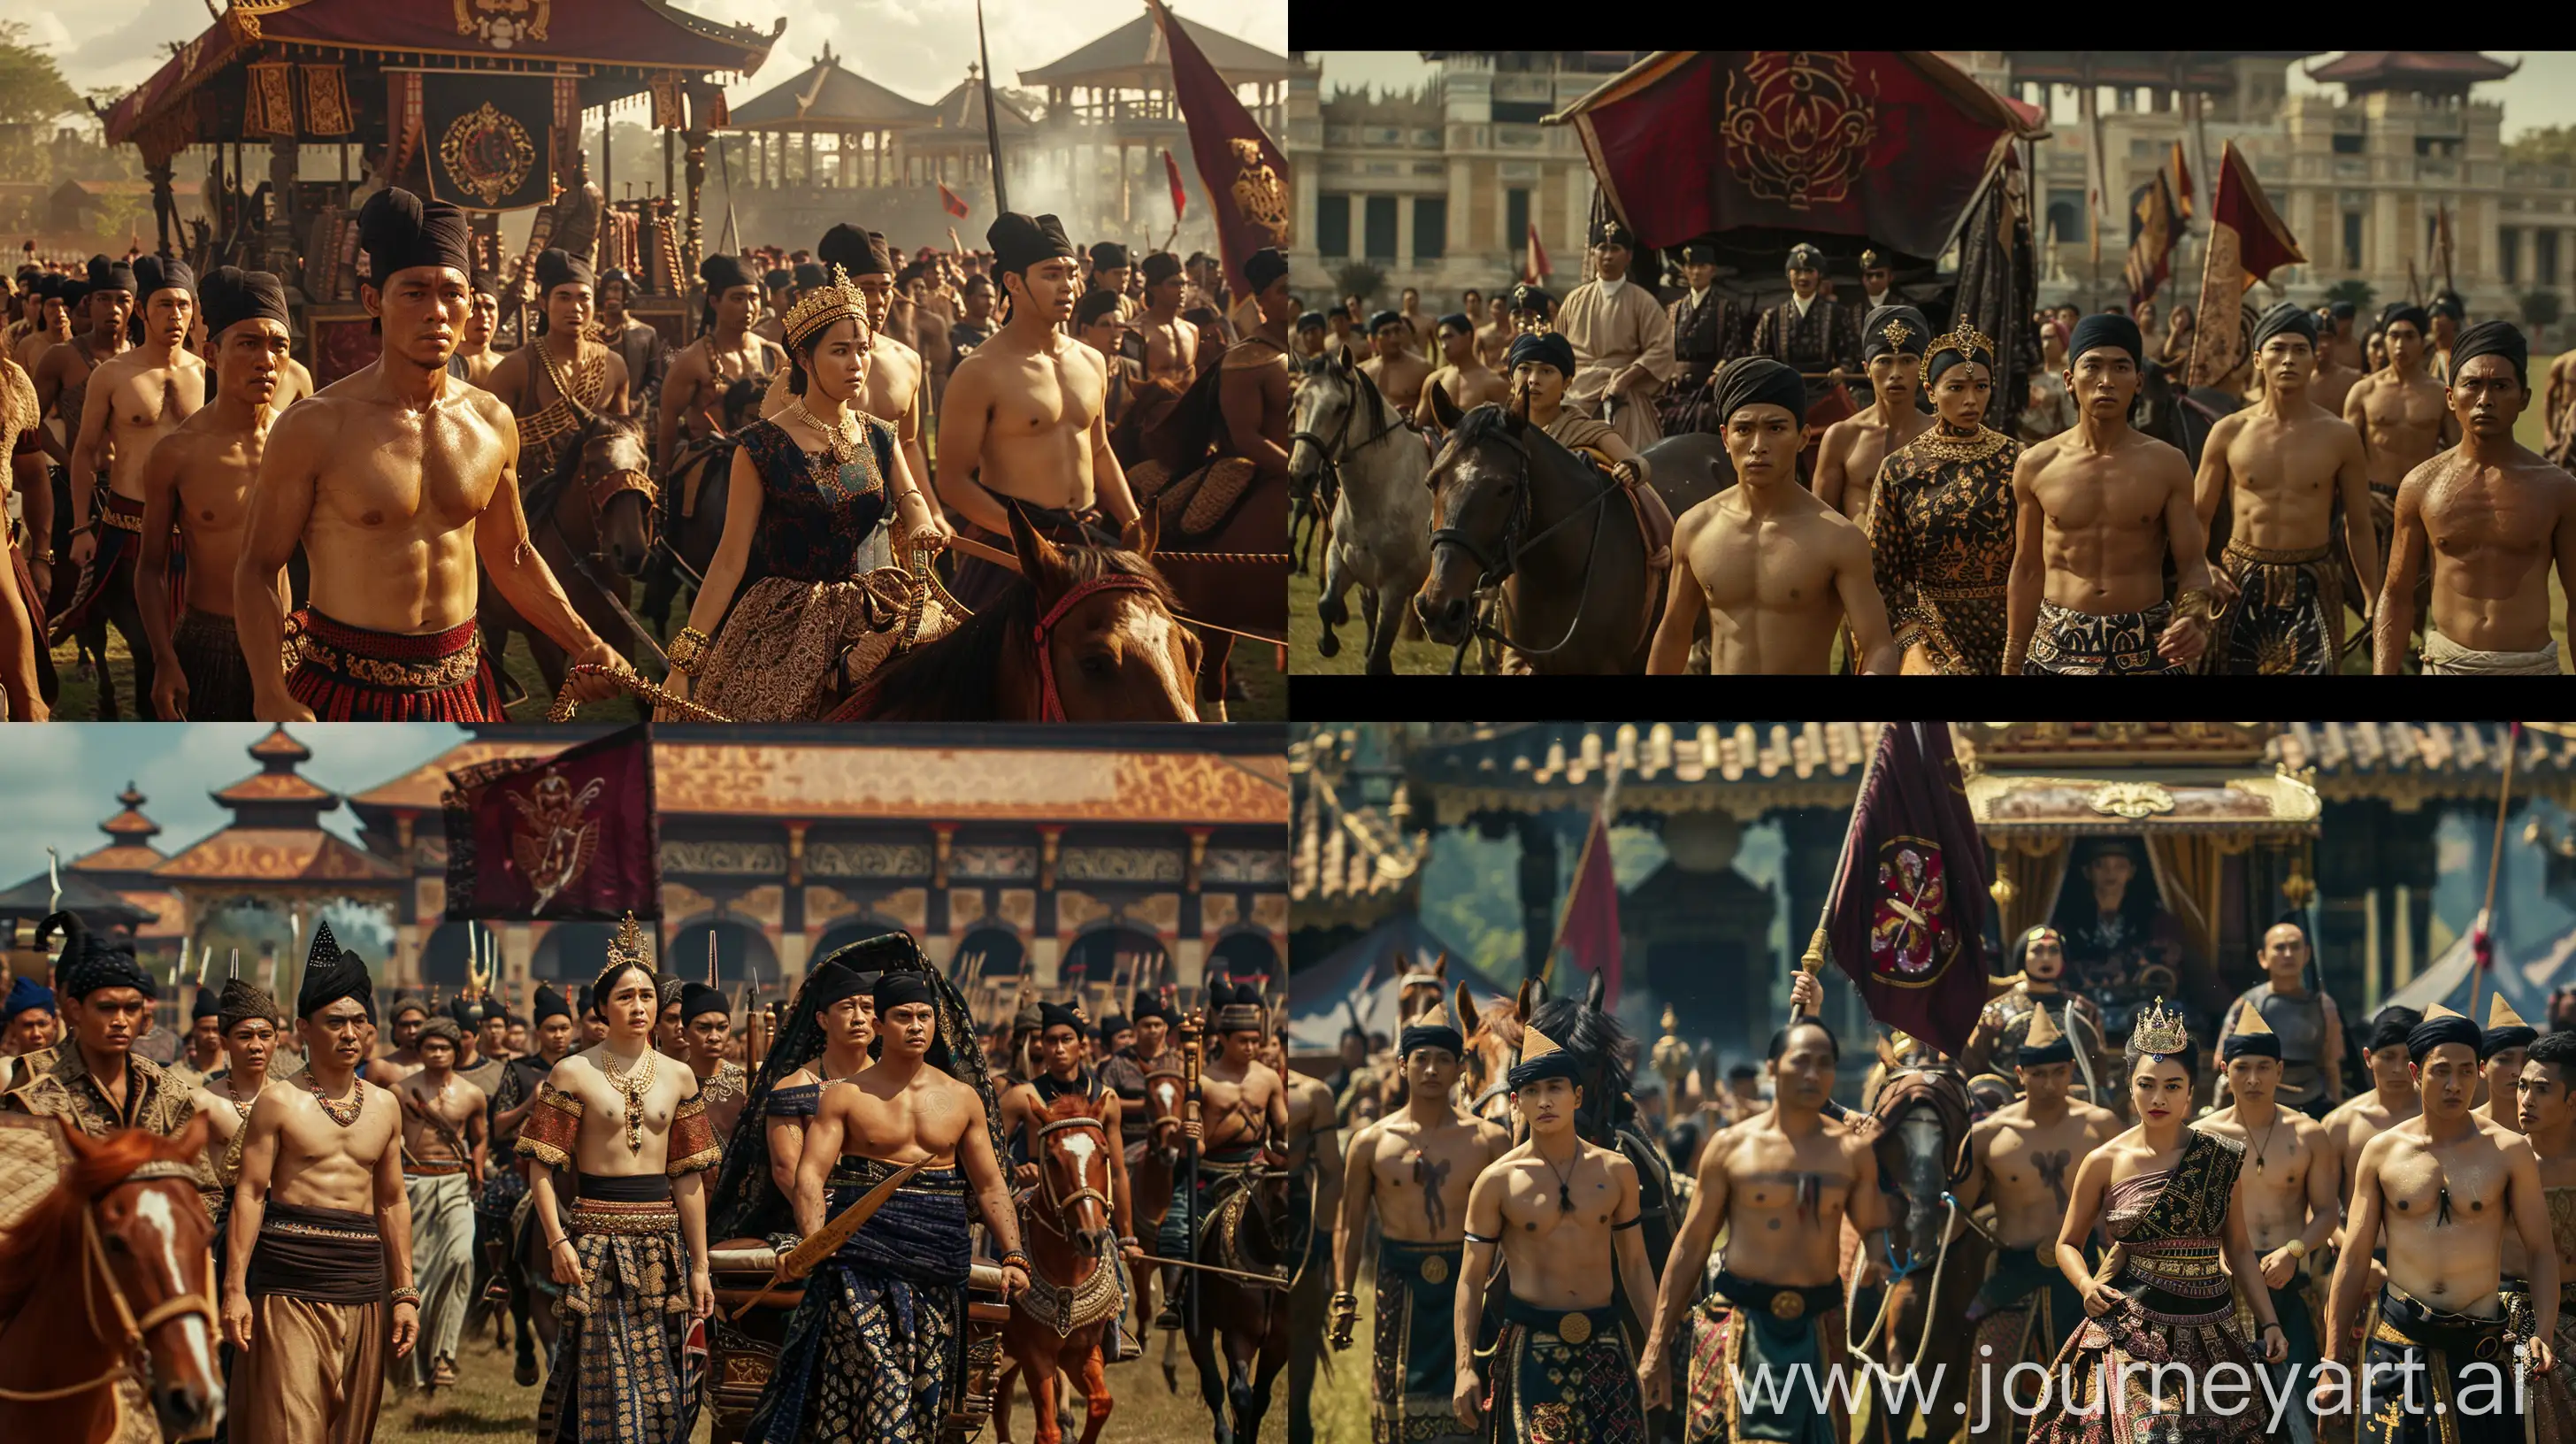 movie scene, the royal group is dressed in traditional Indonesian clothes without shirts, Indonesian faces, brown skin, hair tied in a bun, wearing black headbands, wearing batik skirts typical of the 14th century, some are wearing prisai, some are riding horses, they are carrying a palanquin, in The palanquin is a royal woman, dressed in a dress, and a gold ornament on her head, they also carry a dark red flag, on the flag is a keris logo, they arrive at the royal field, the background of the royal building. nice detail, --v 6 --ar 16:9